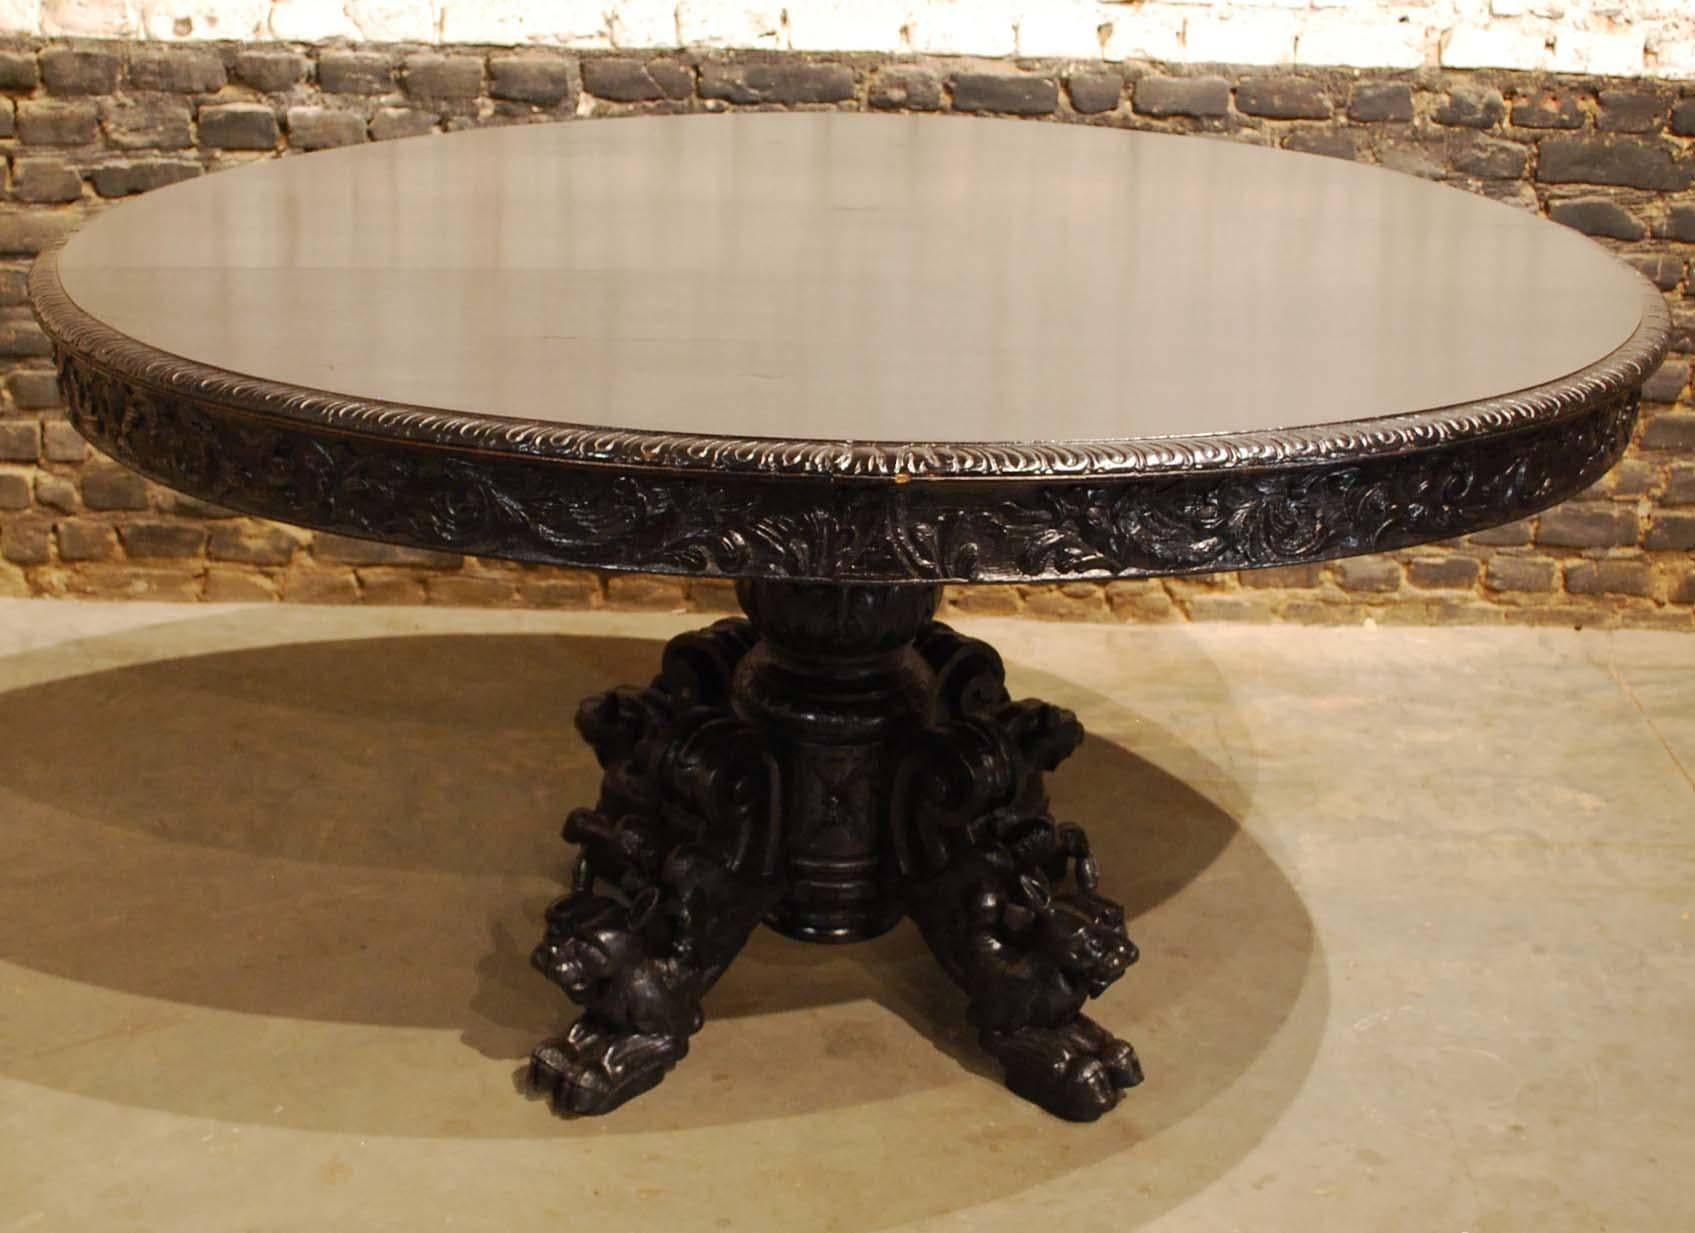 This 19th century French Renaissance oval hunt table was sculpted from solid oak and features elaborately carved winged foxes beautifully rendered on the scrolled legs below.
Support is provided by a large carved urn style pediment at the center.